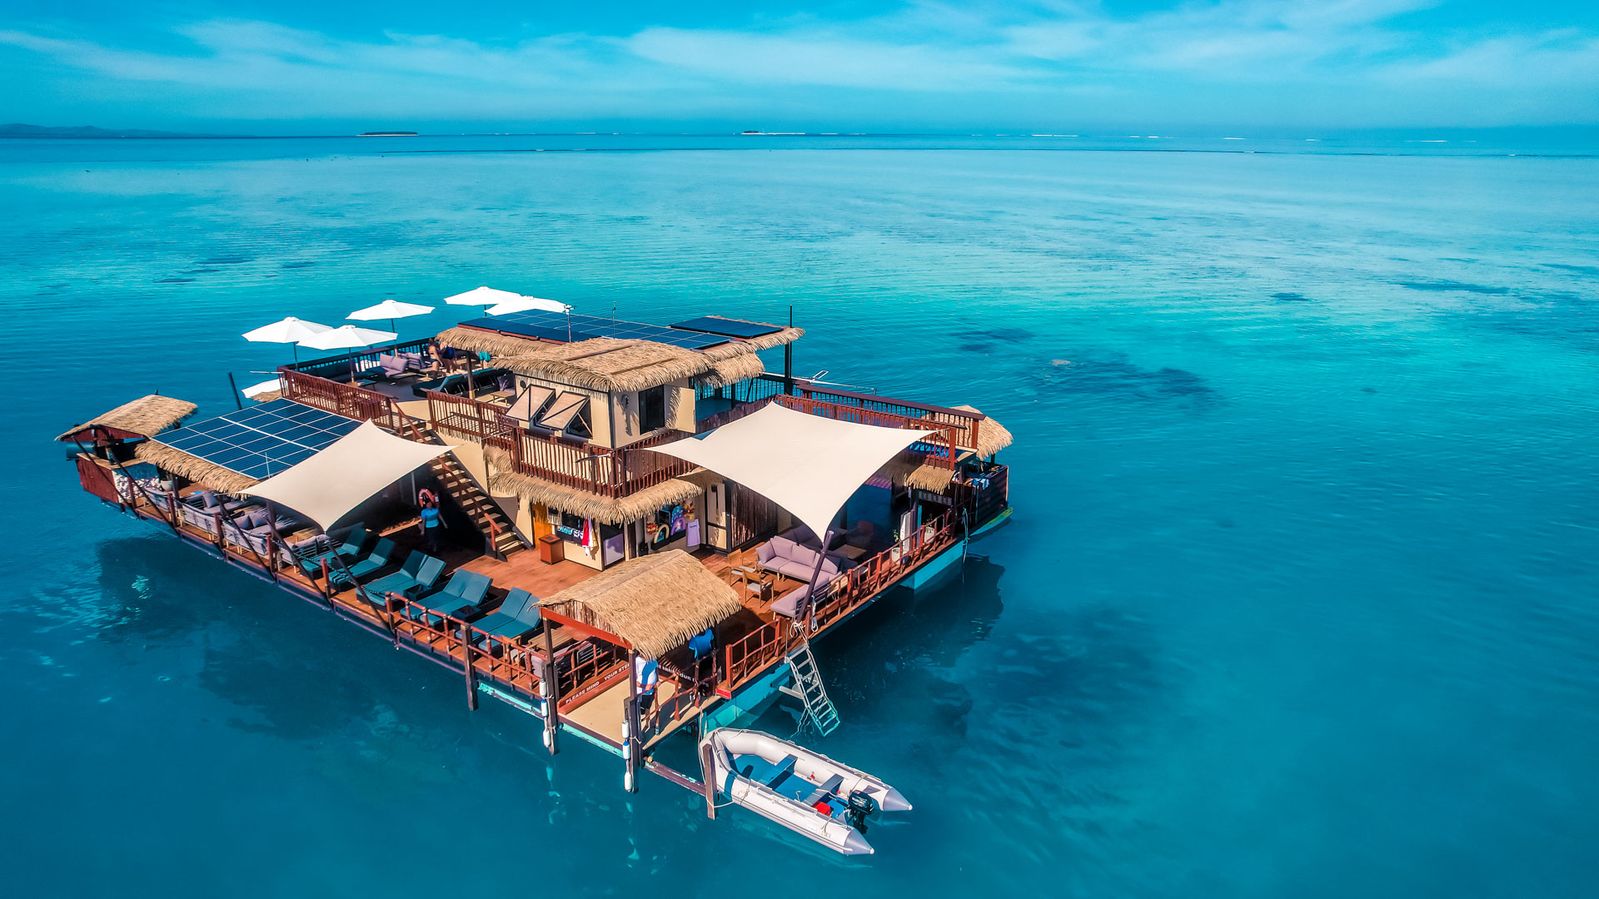 Bird's eye view of Seventh Heaven Raft Bar floating in the Pacific Ocean